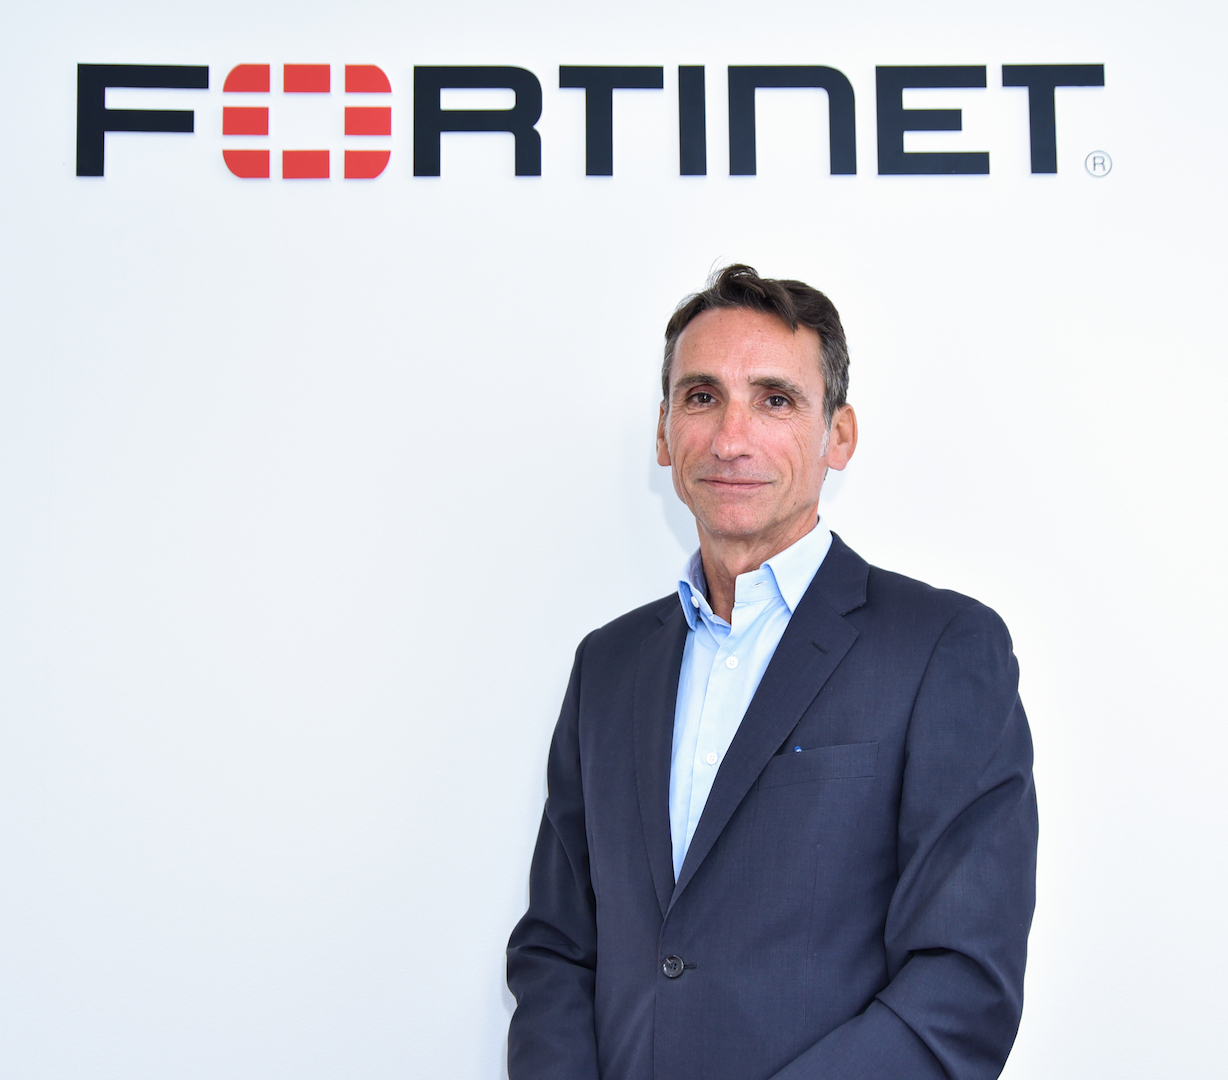 Fortinet expert on securing the Internet of Things